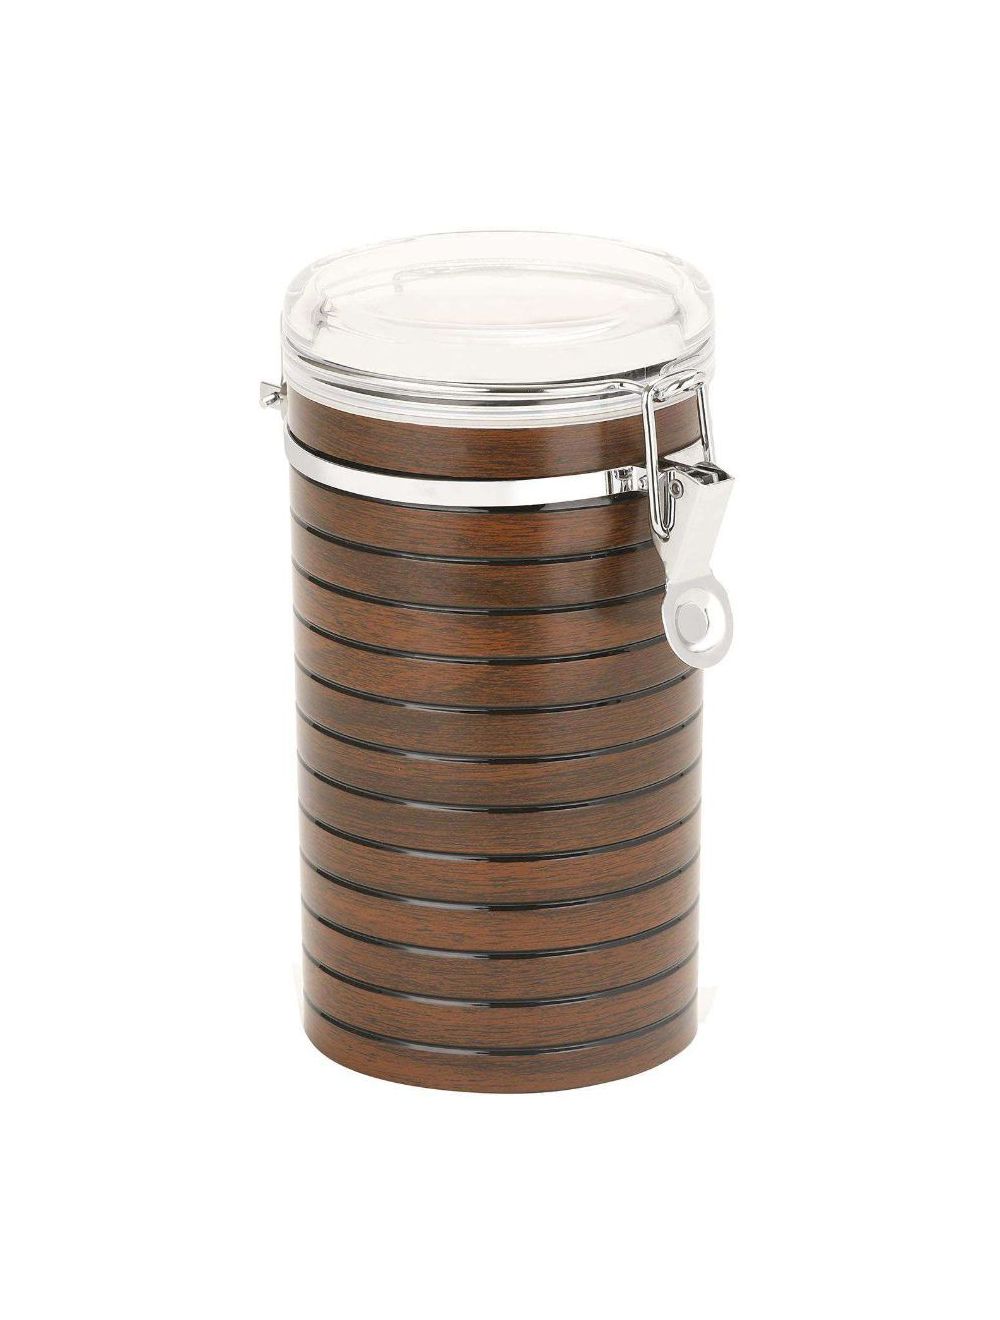 Royalford RF8223 Stainless Steel Coffee Container Storage